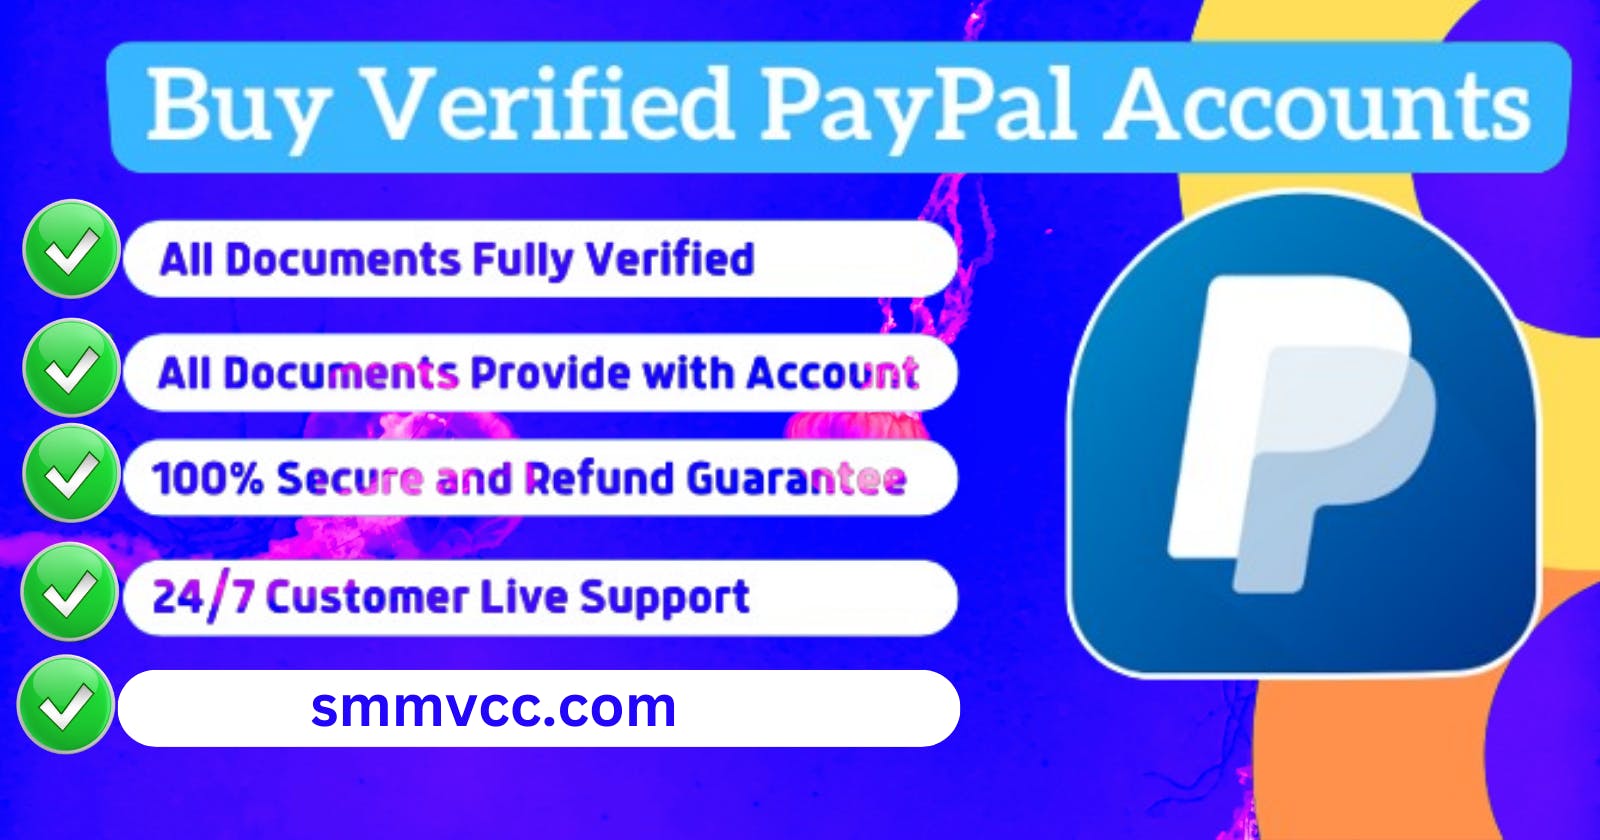 The Top 5 Advantages of Verifying PayPal Account